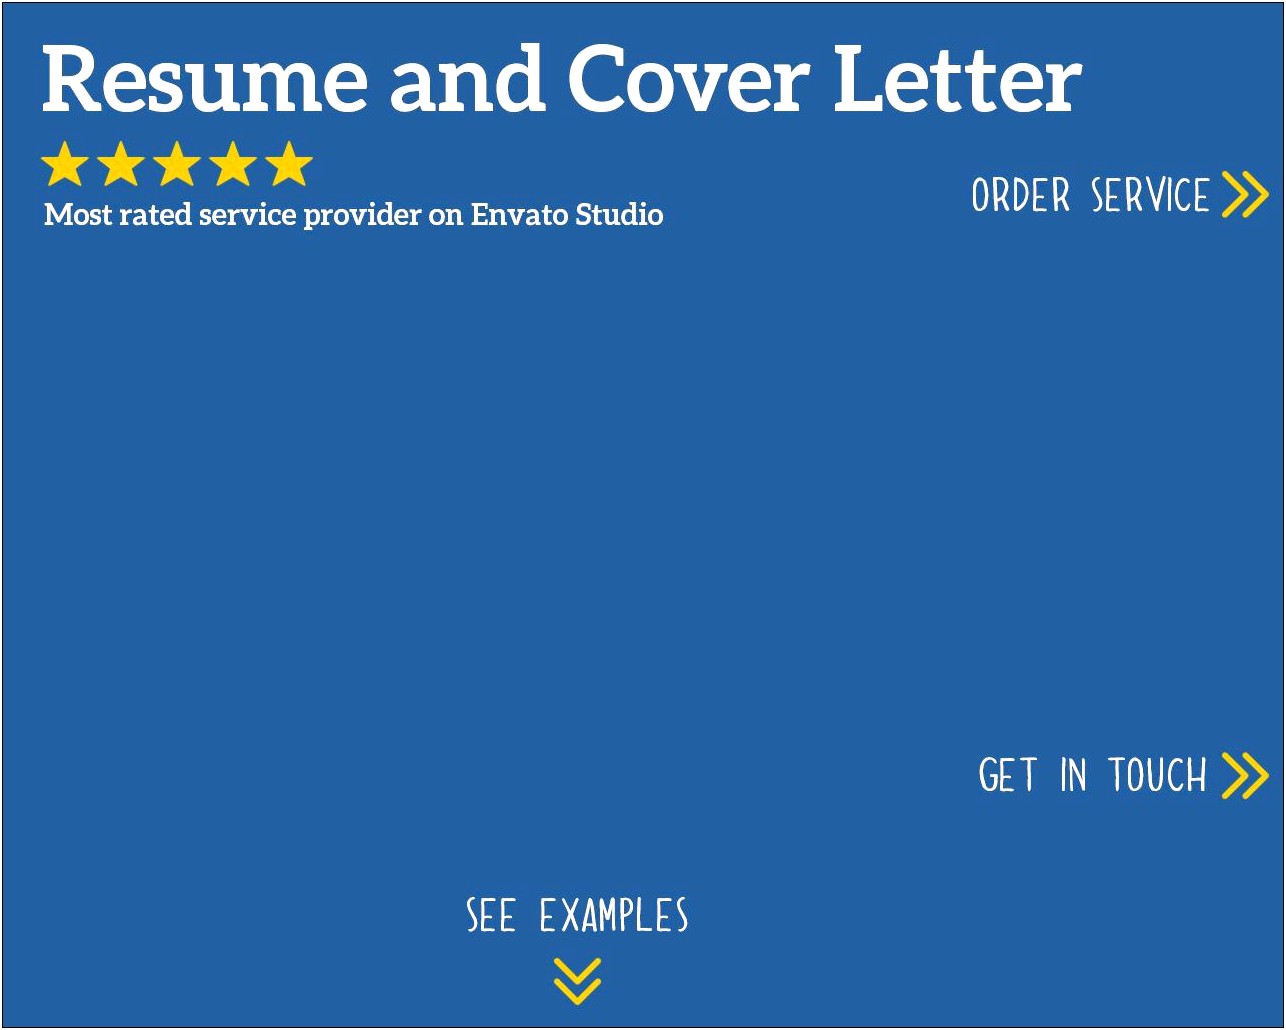 Writing A Professional Resume And Cover Letter